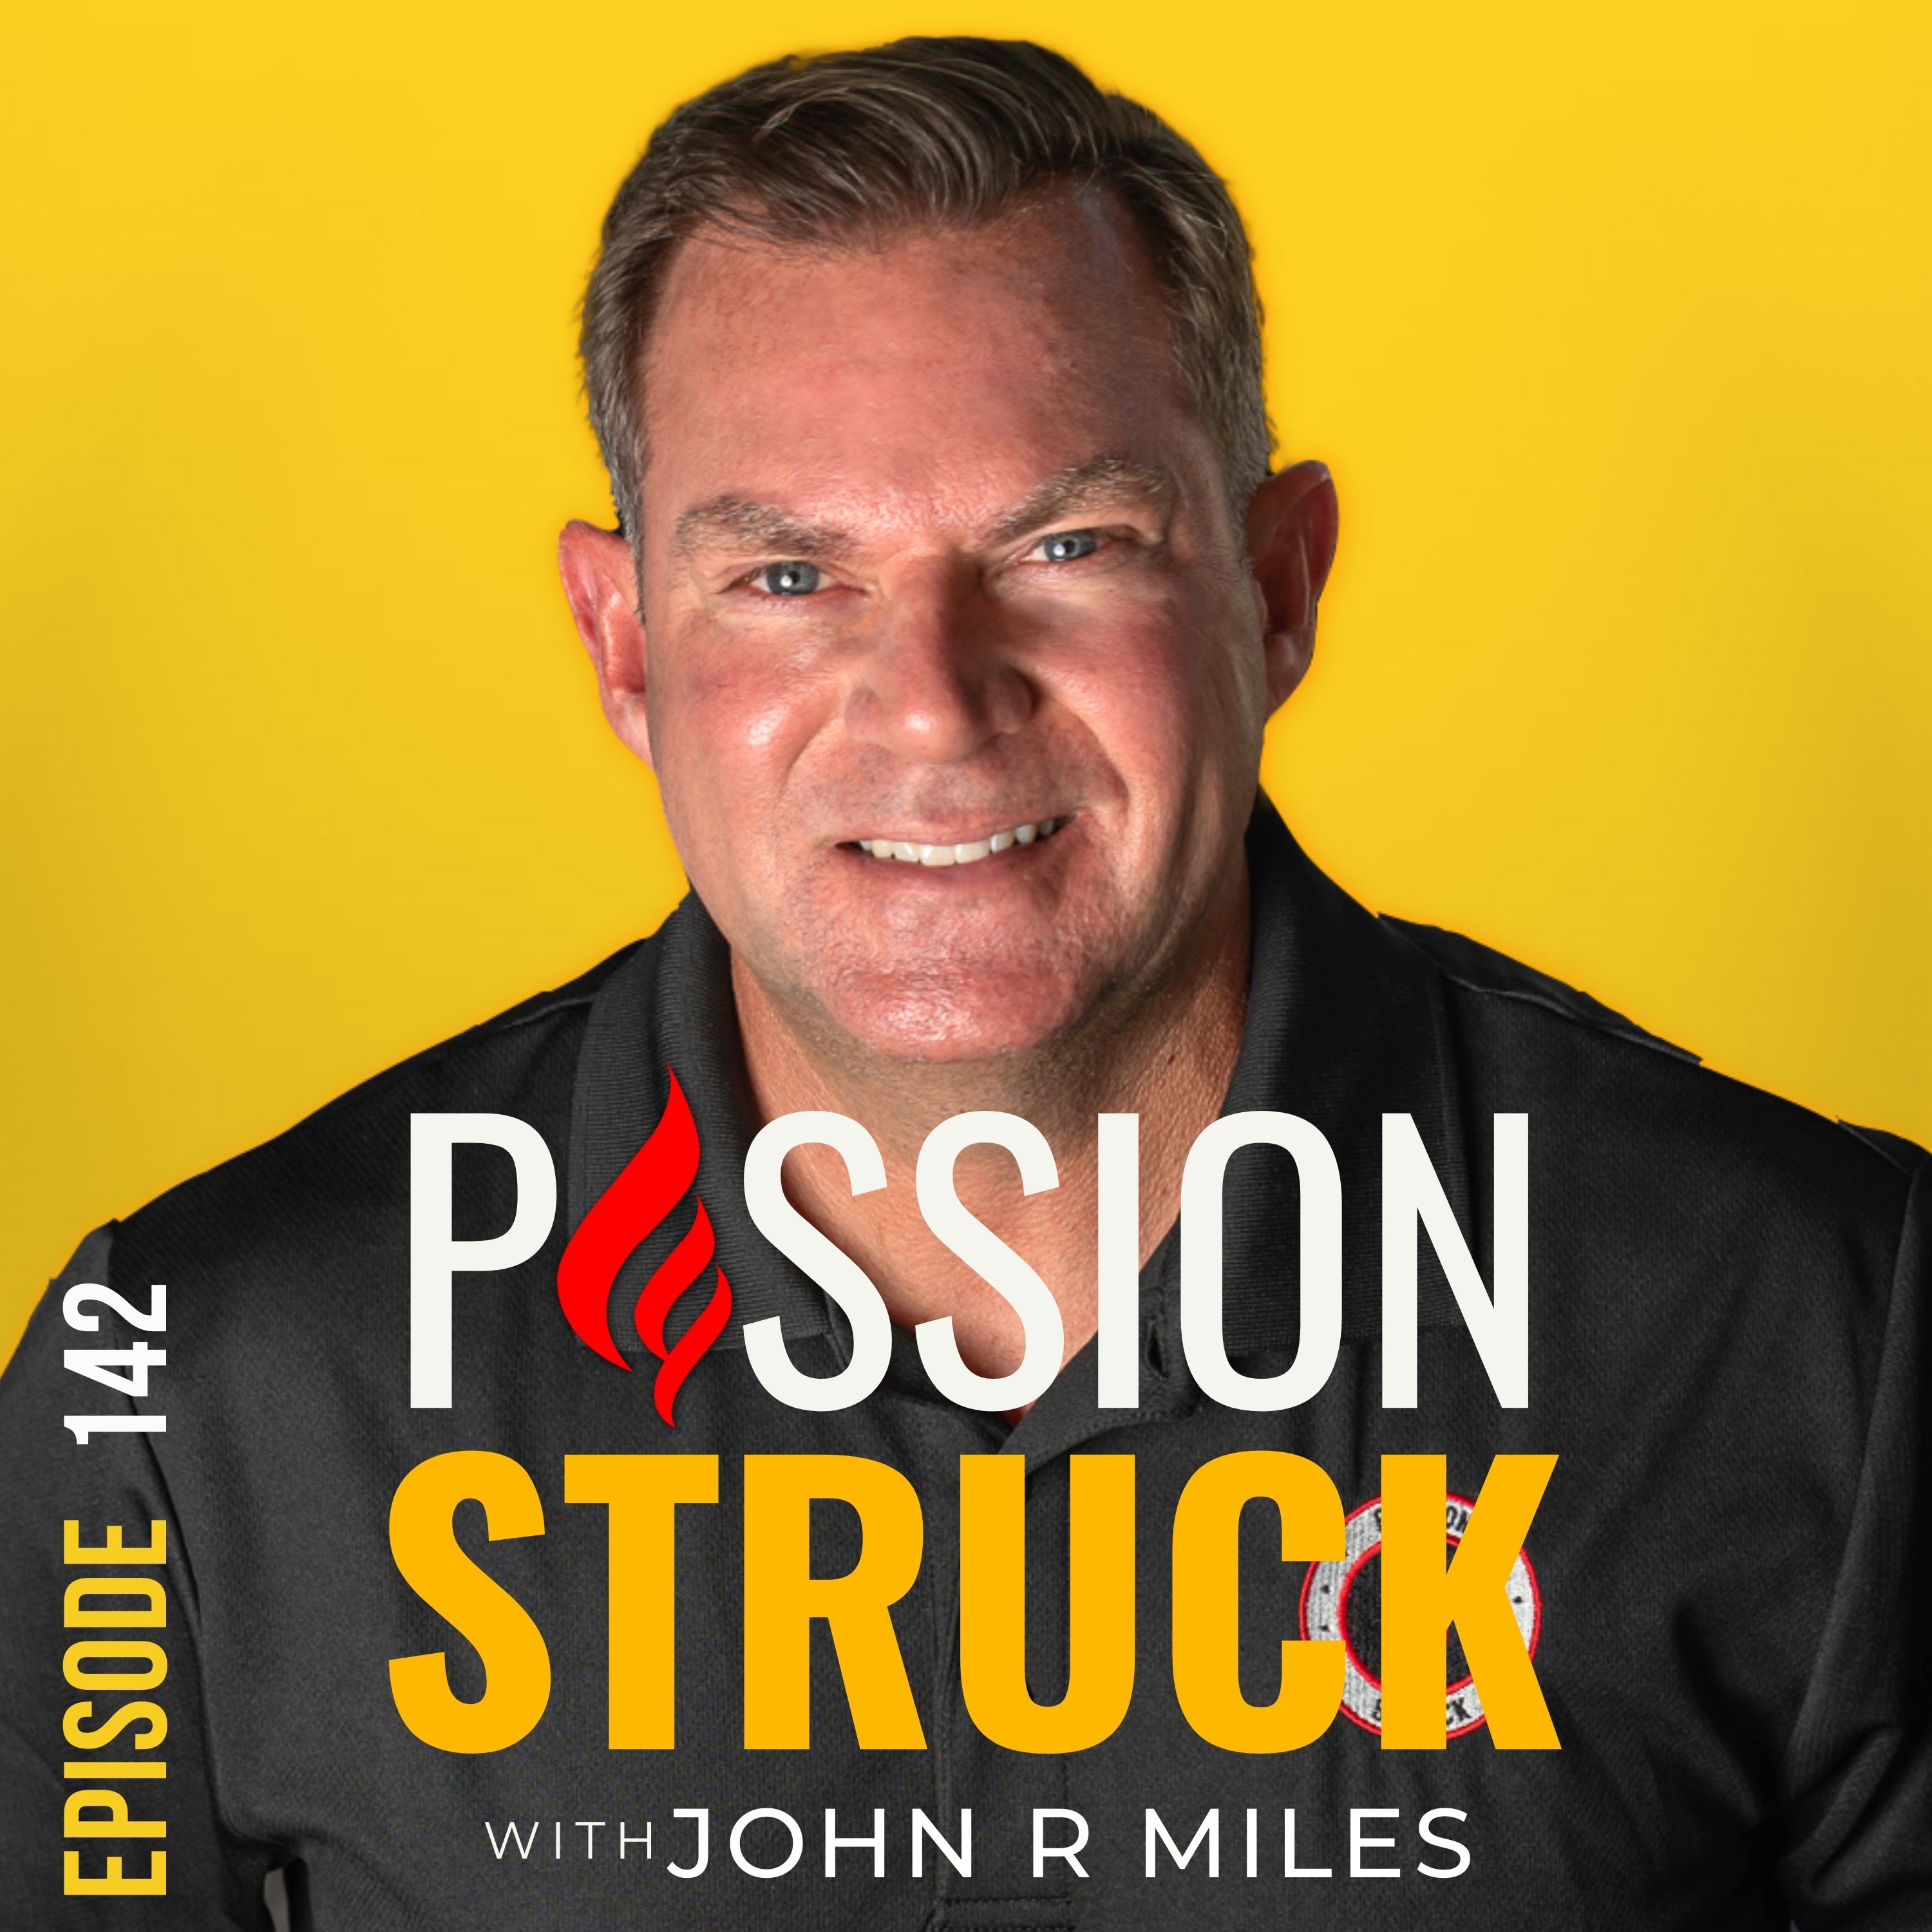 Passion Struck with John R. Miles album cover for episode 142 on emotional healing